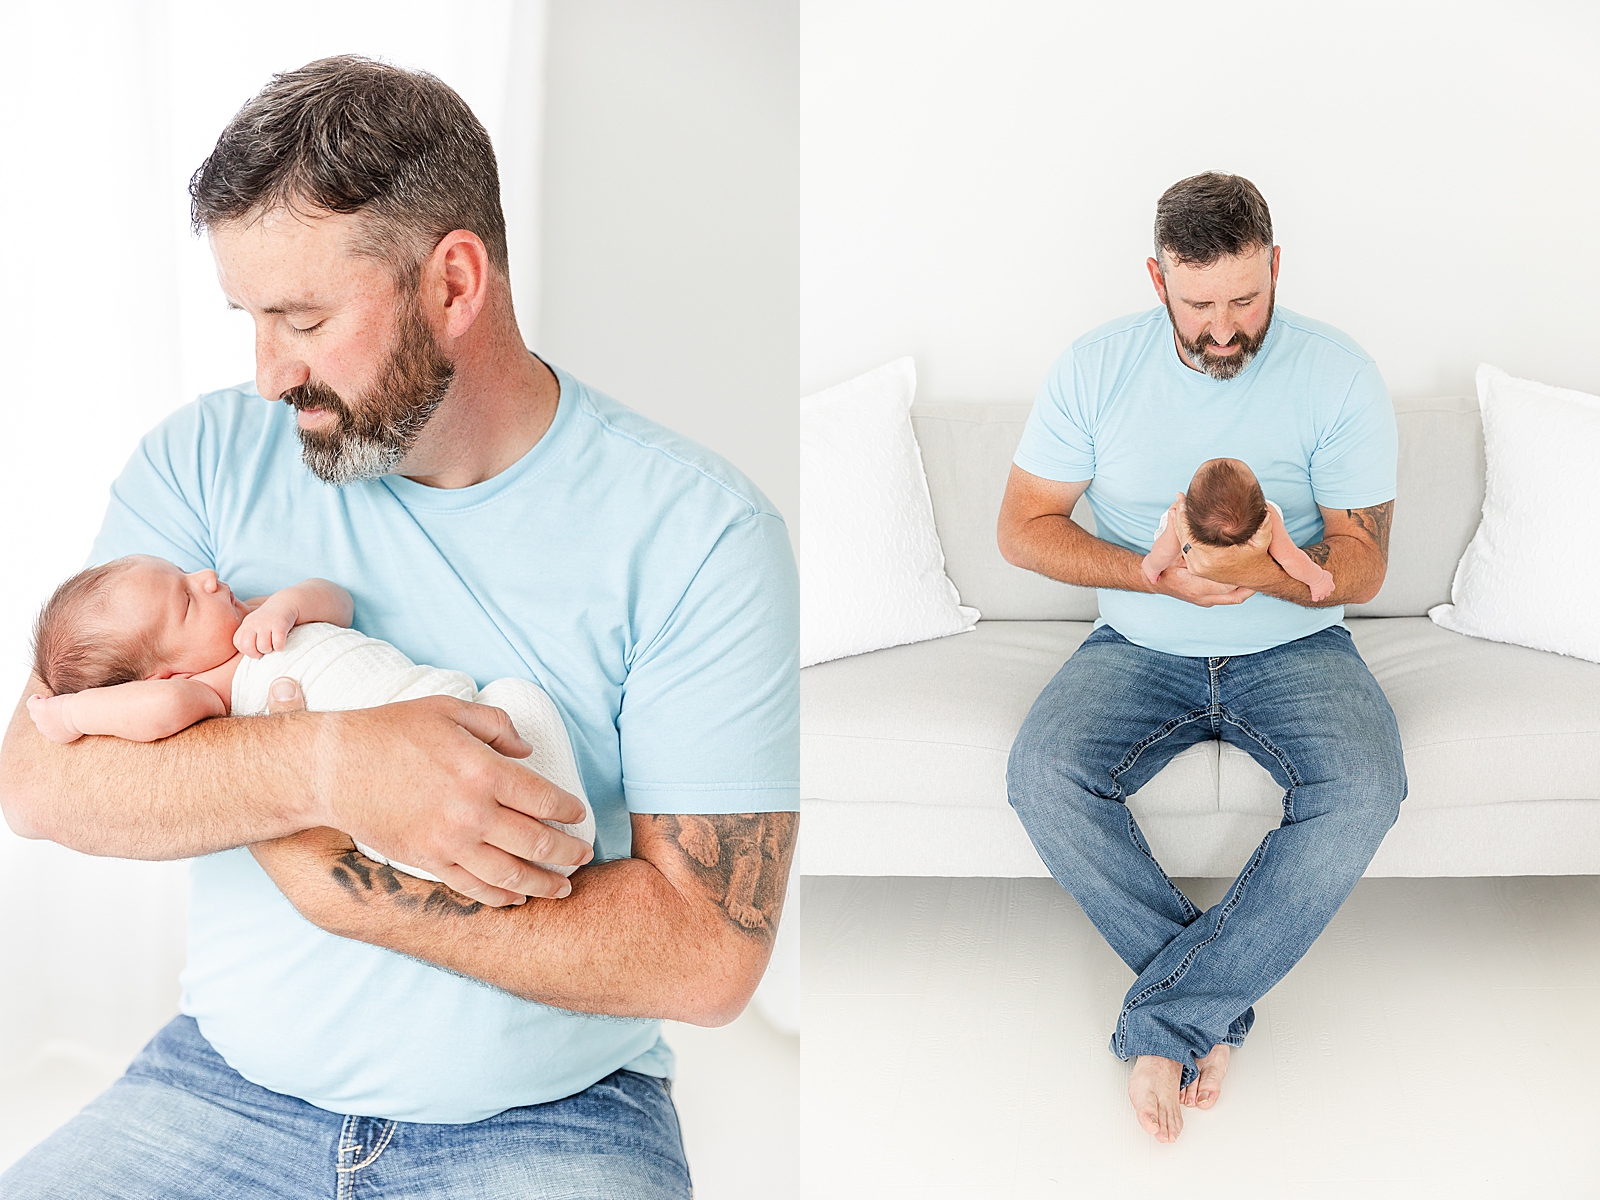 dad sitting holding newborn baby boy looking down at him and wearing blue shirt and jeans